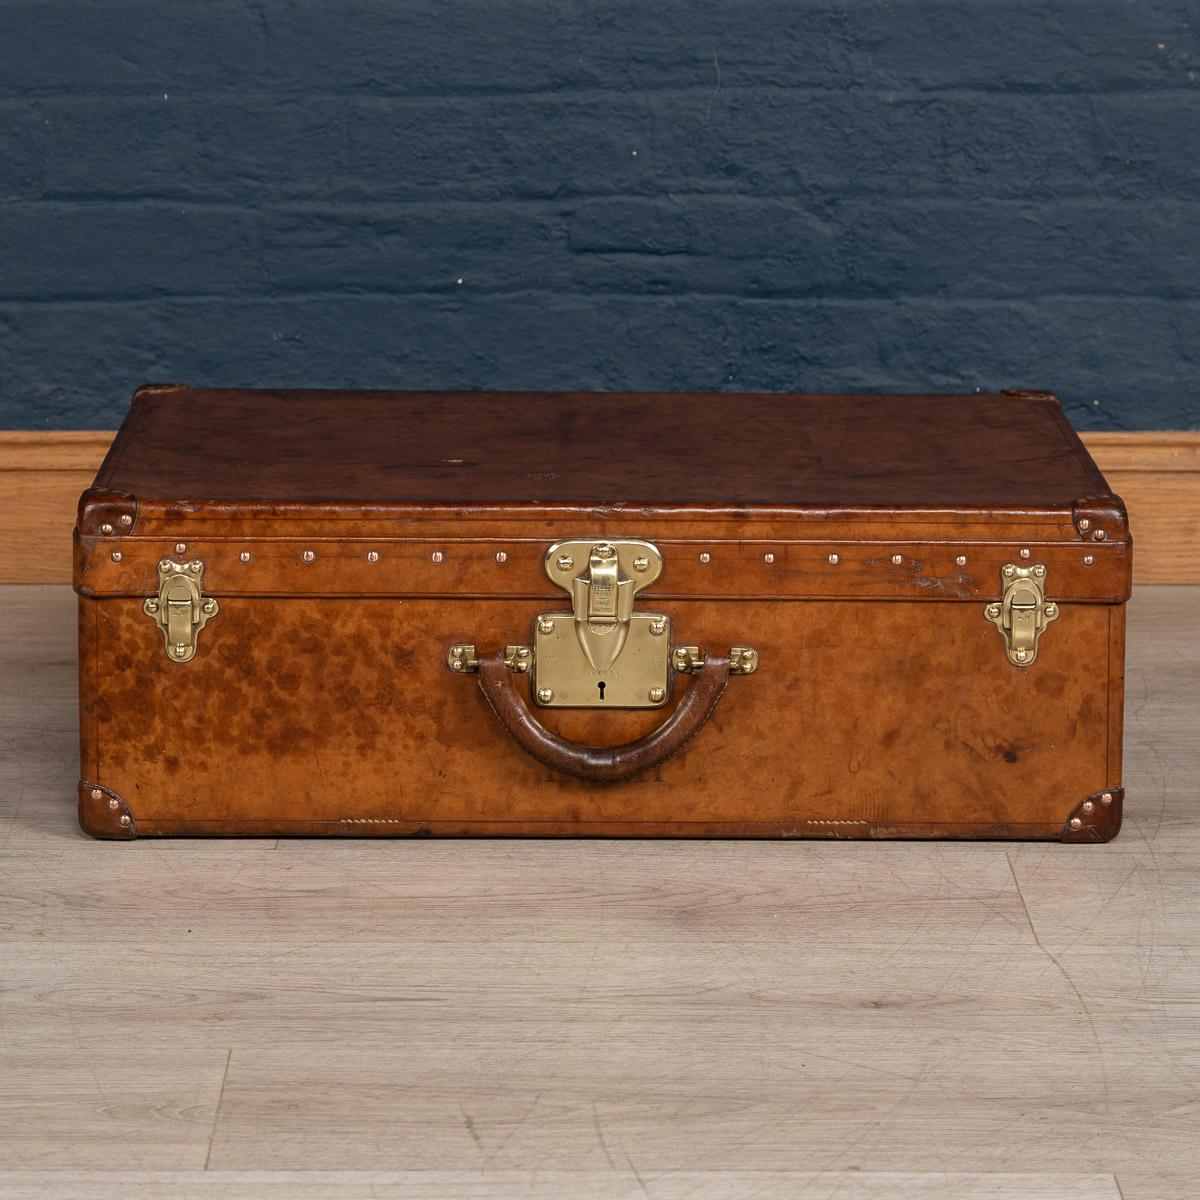 Antique 20th century very rare Louis Vuitton suitcase, covered not in the world famous (but more common) monogram canvas but in a single piece of cow hide. These all-leather trunks and cases were made by special order and Louis Vuitton used to take